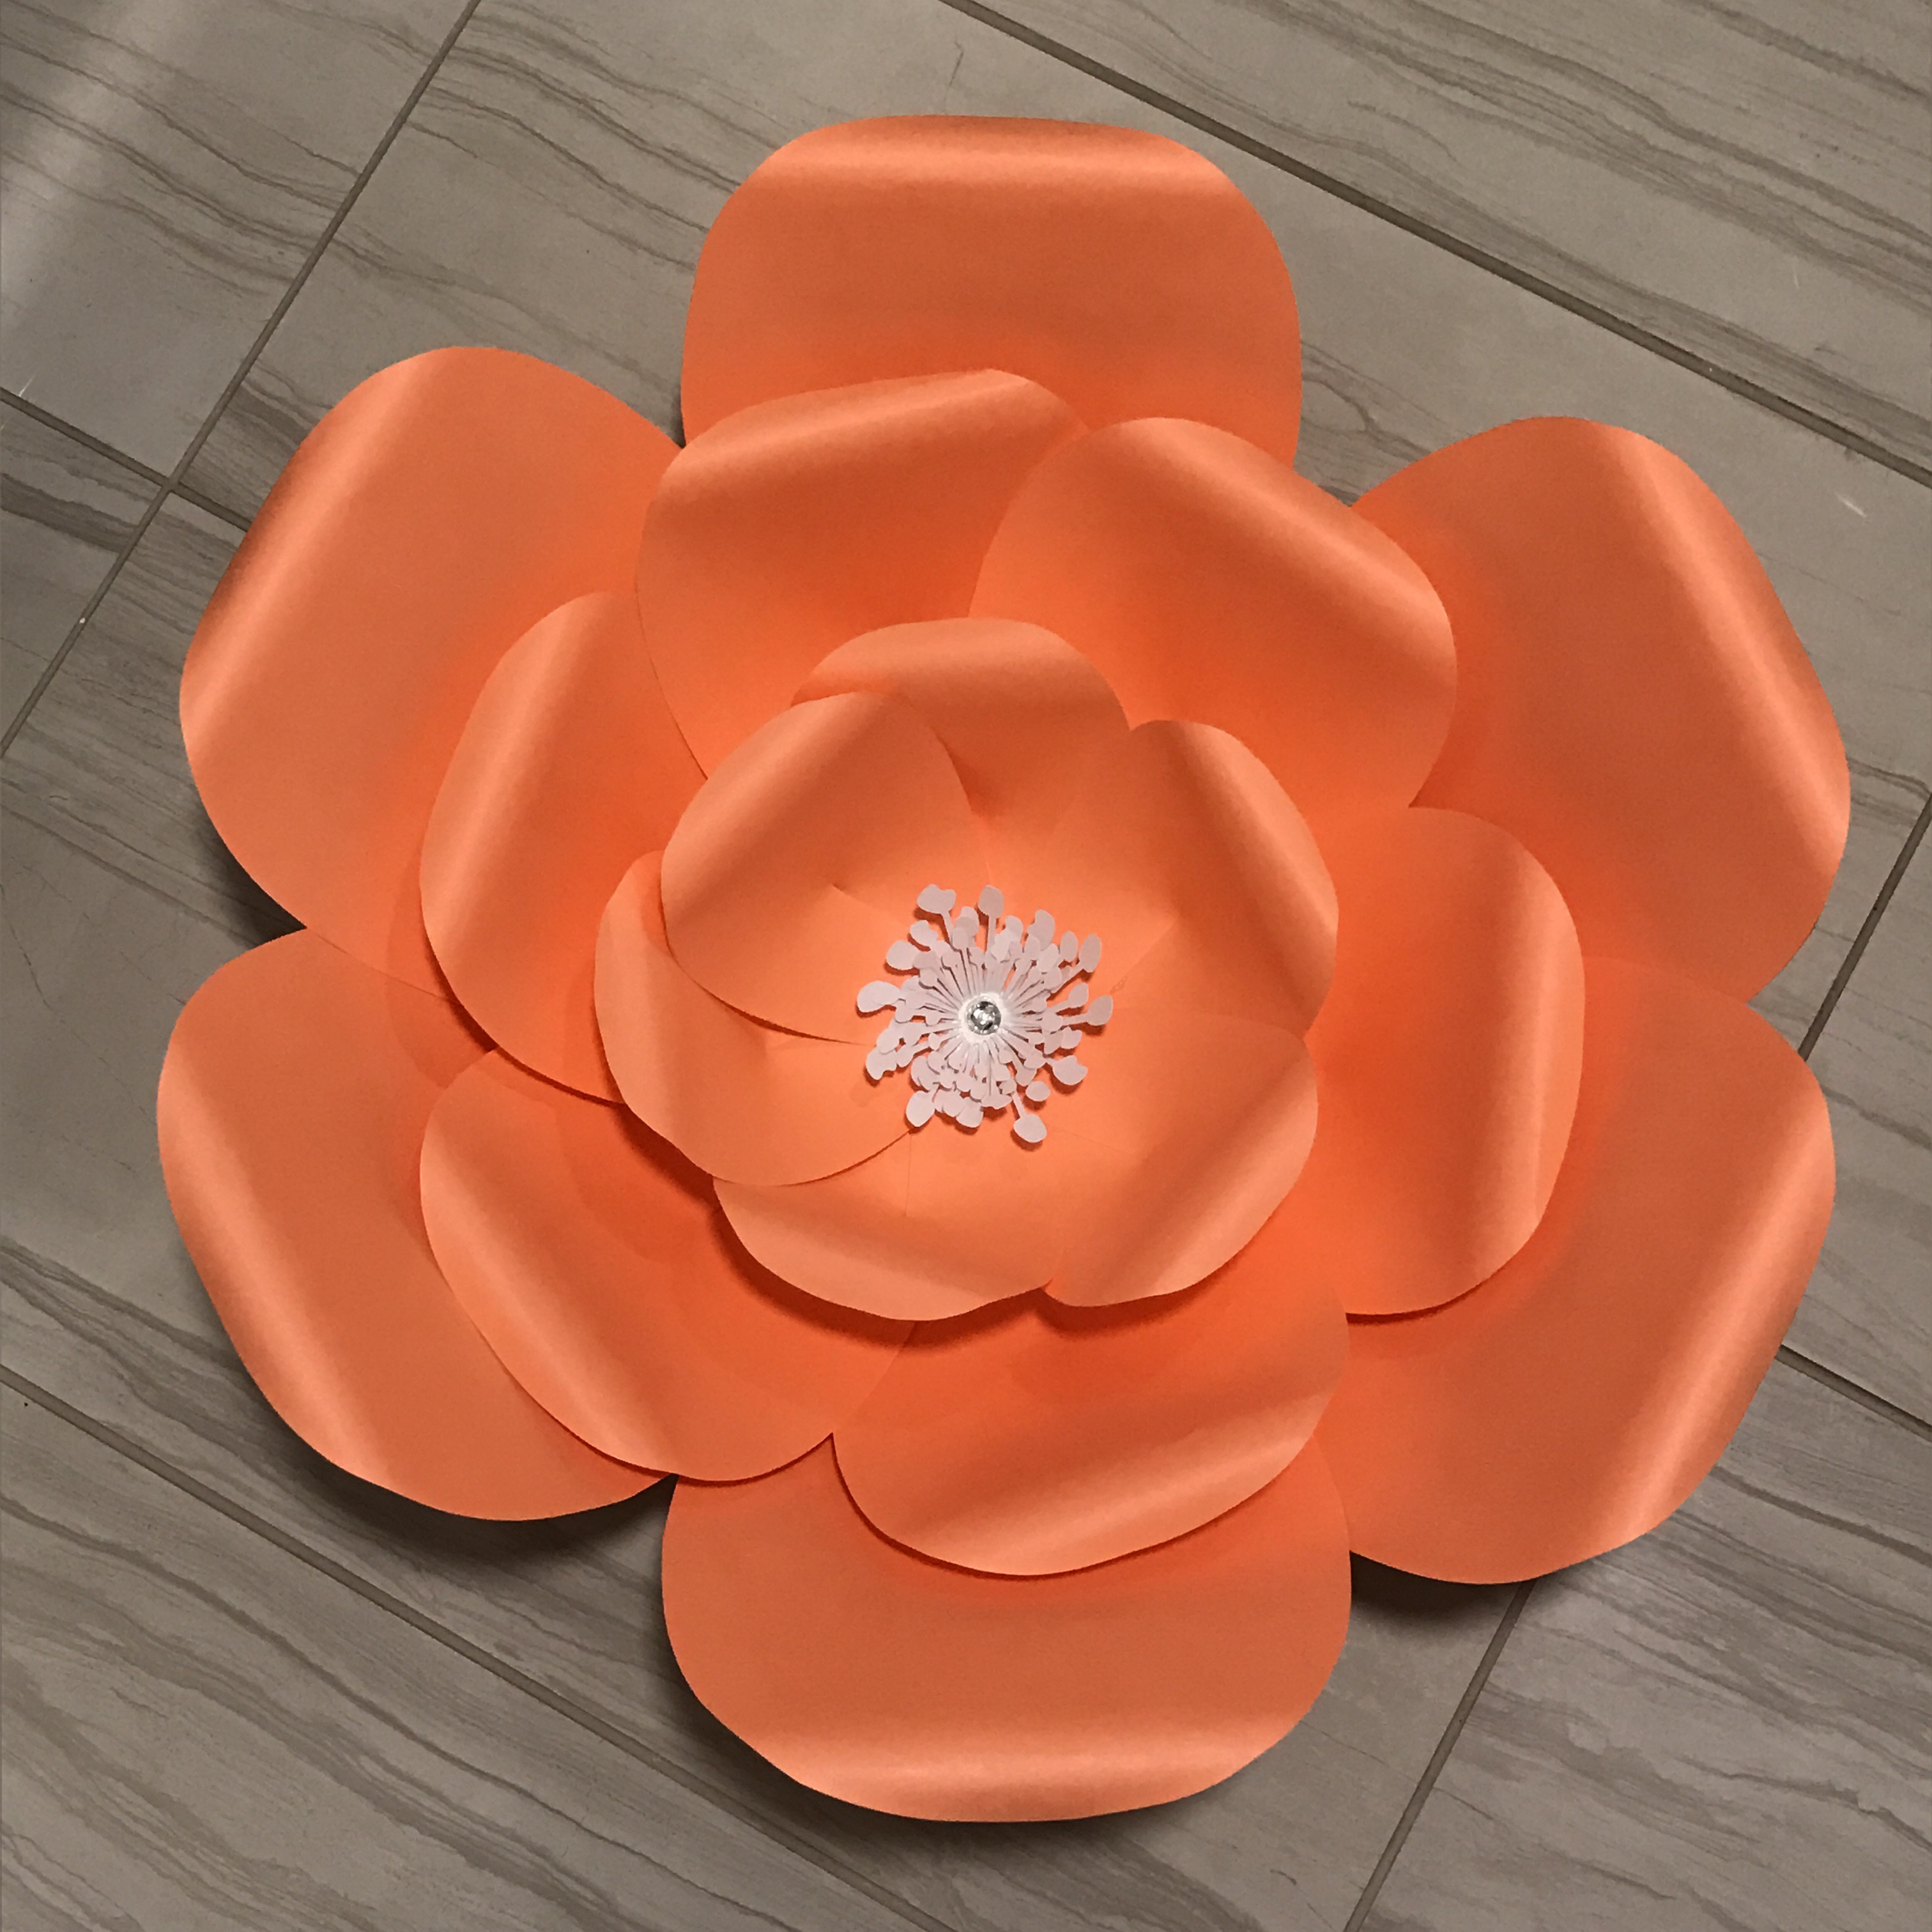 CRAFT 6 Large PAPER FLOWERS Oranges Yellows 12062 CREATE 